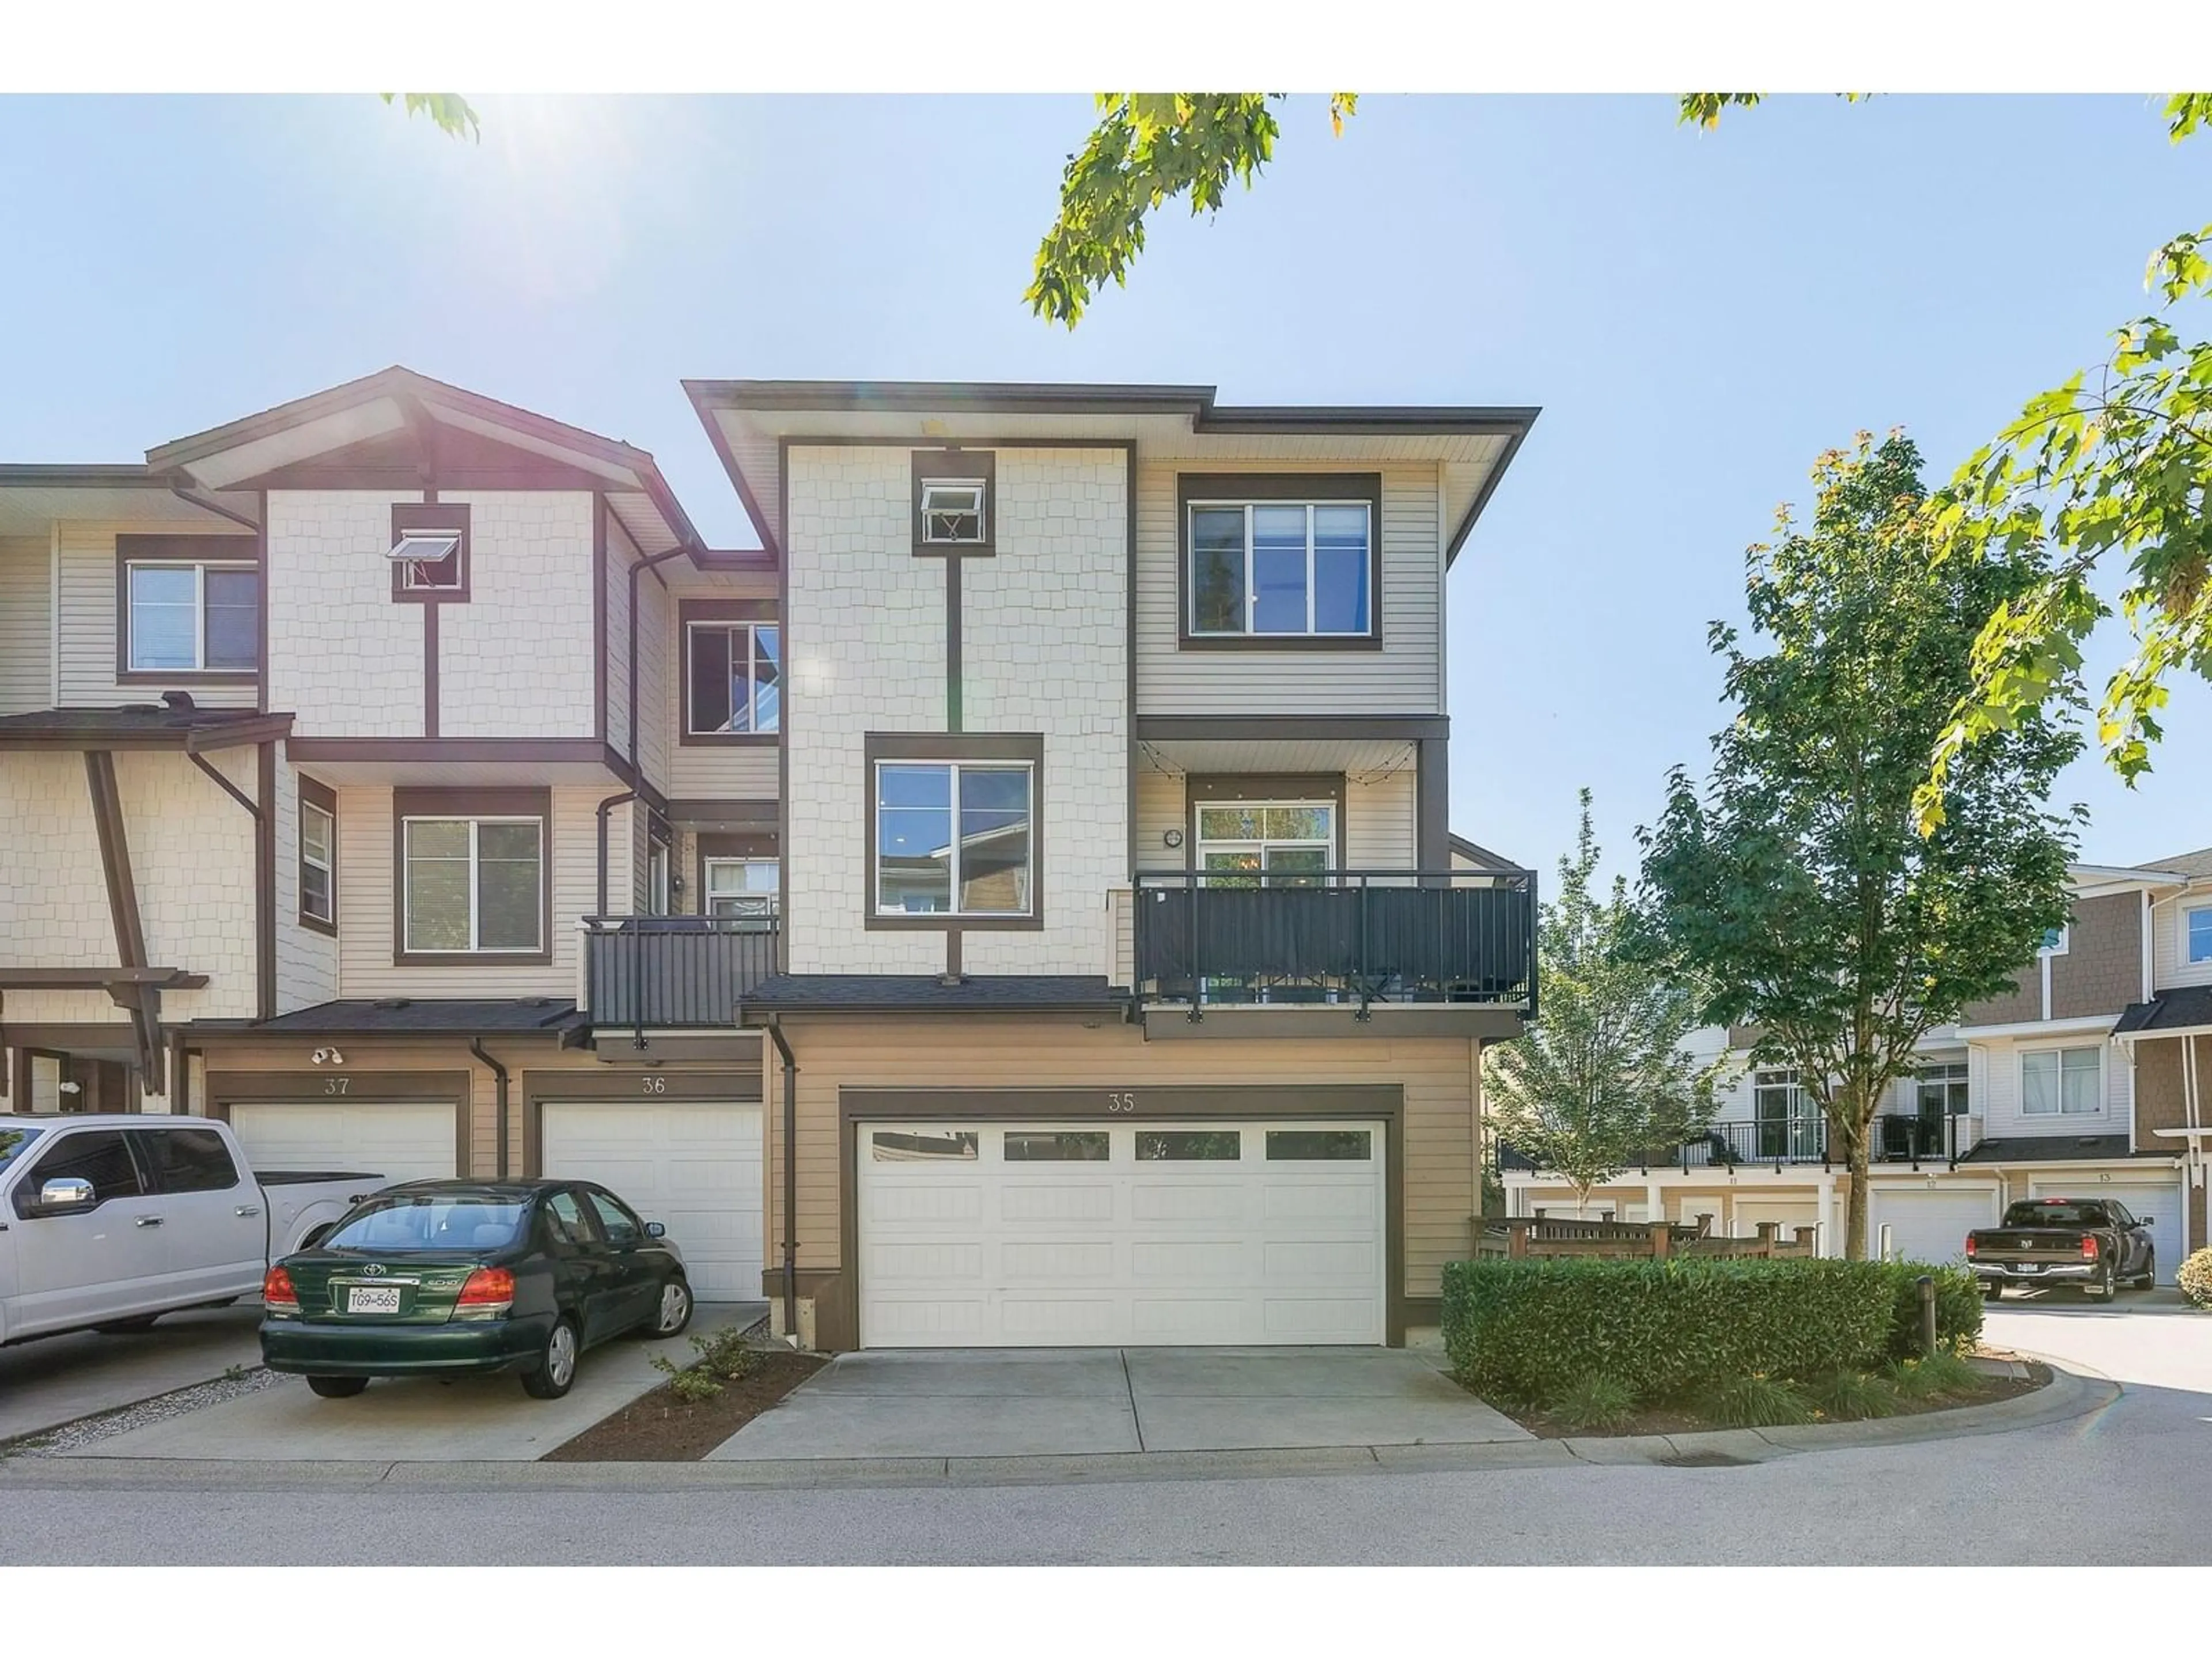 A pic from exterior of the house or condo for 35 19433 68 AVENUE, Surrey British Columbia V4N6M8